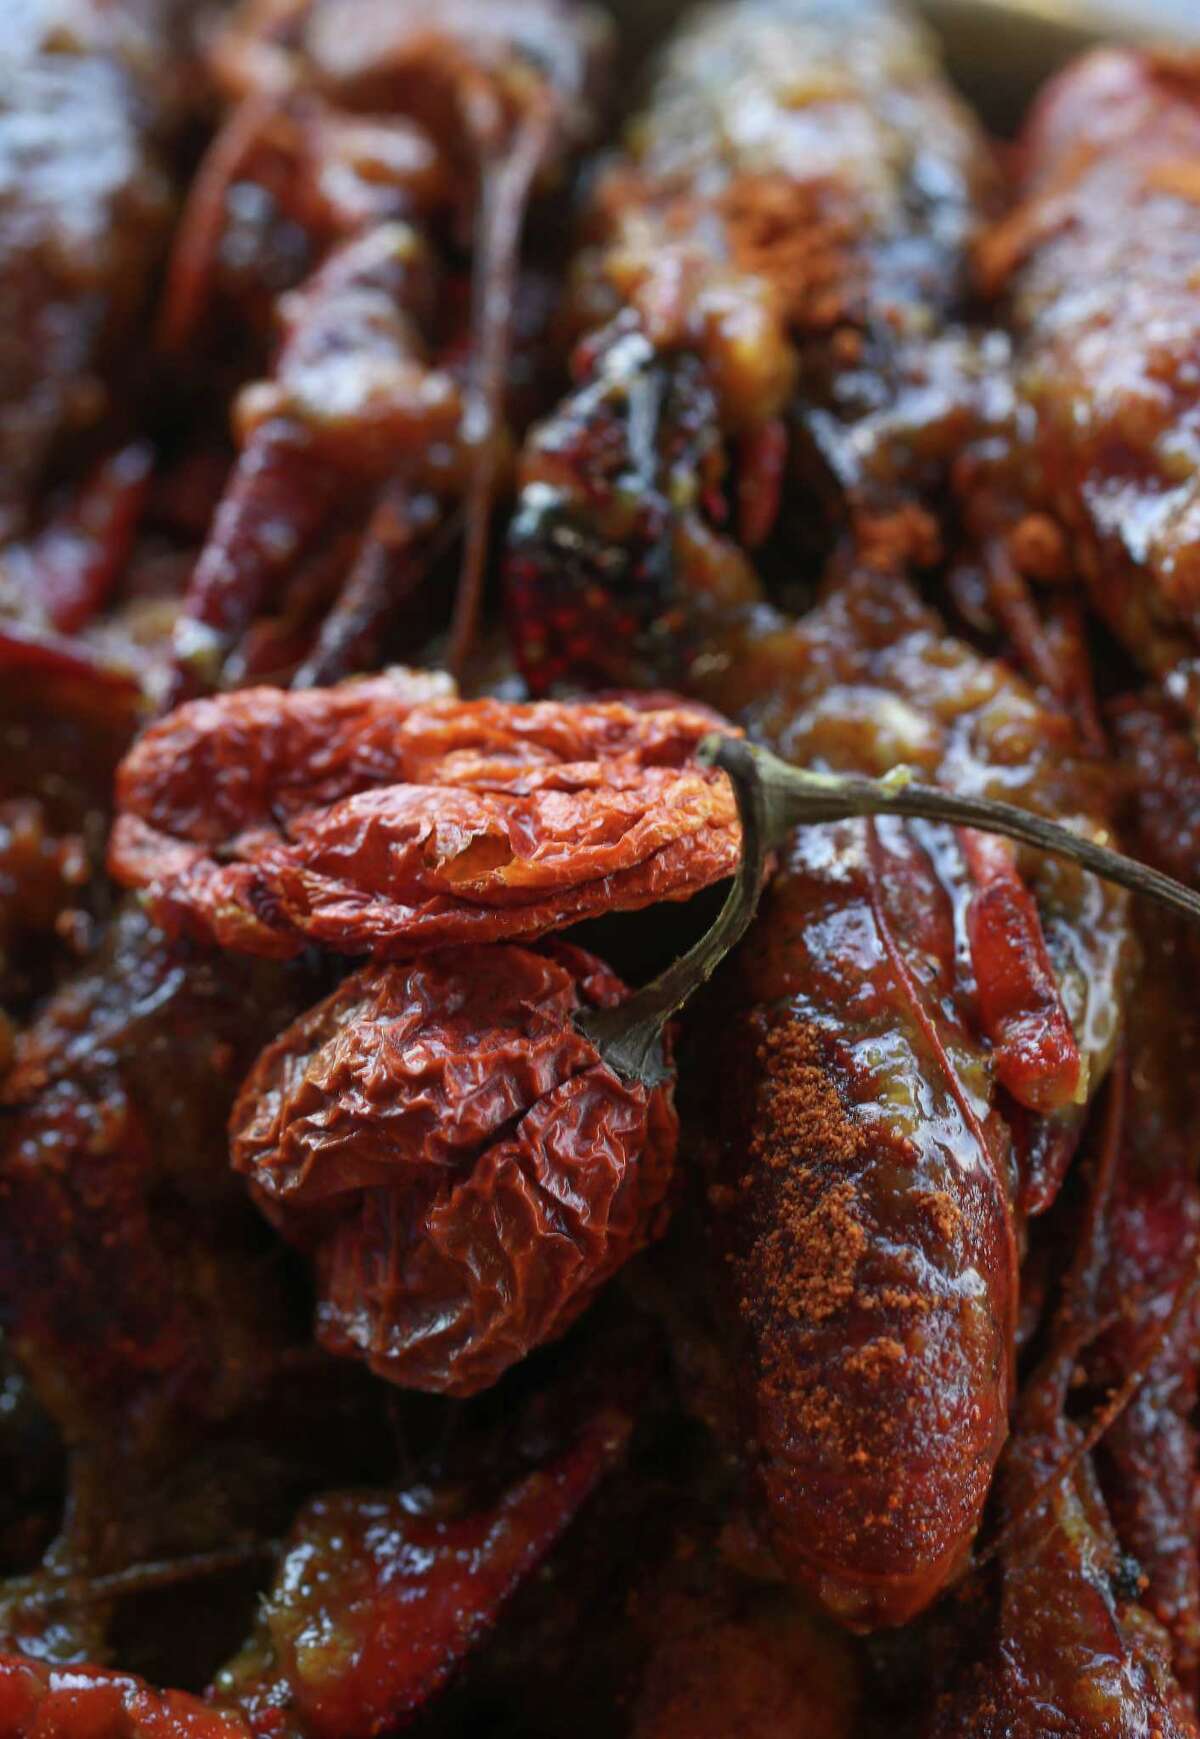 Casian Crawfish has created a Vietnamese-style Cajun crawfish dish coated in Carolina Reaper chile pepper, one of the world's hottest peppers.